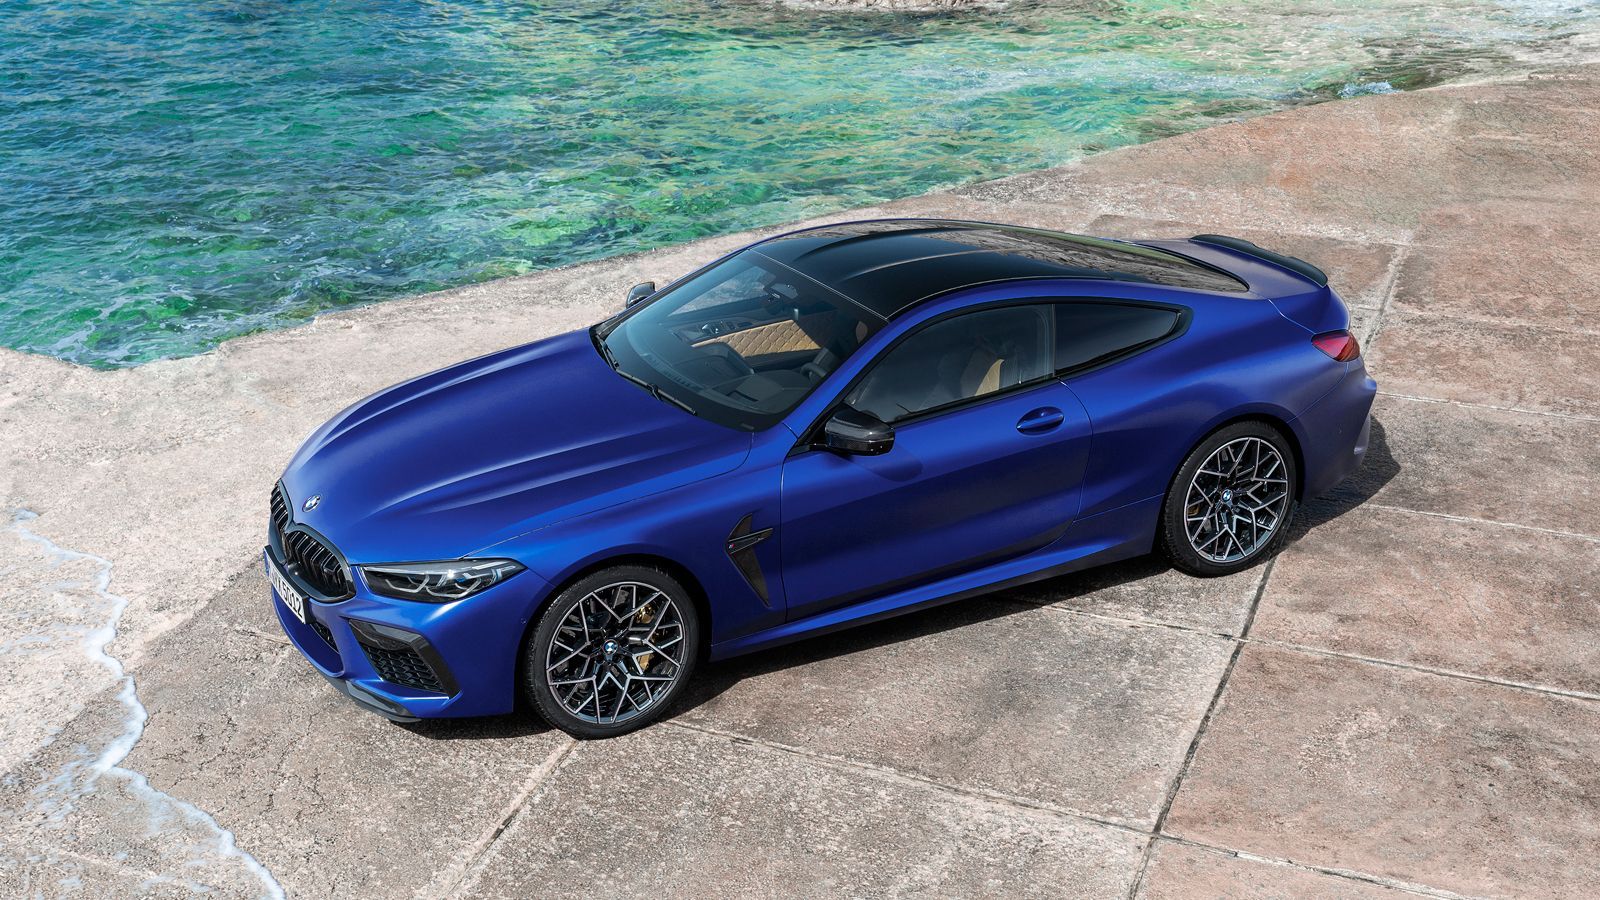 2020 BMW M8 first drive: Pushing the limits of mechanical and electronic performance